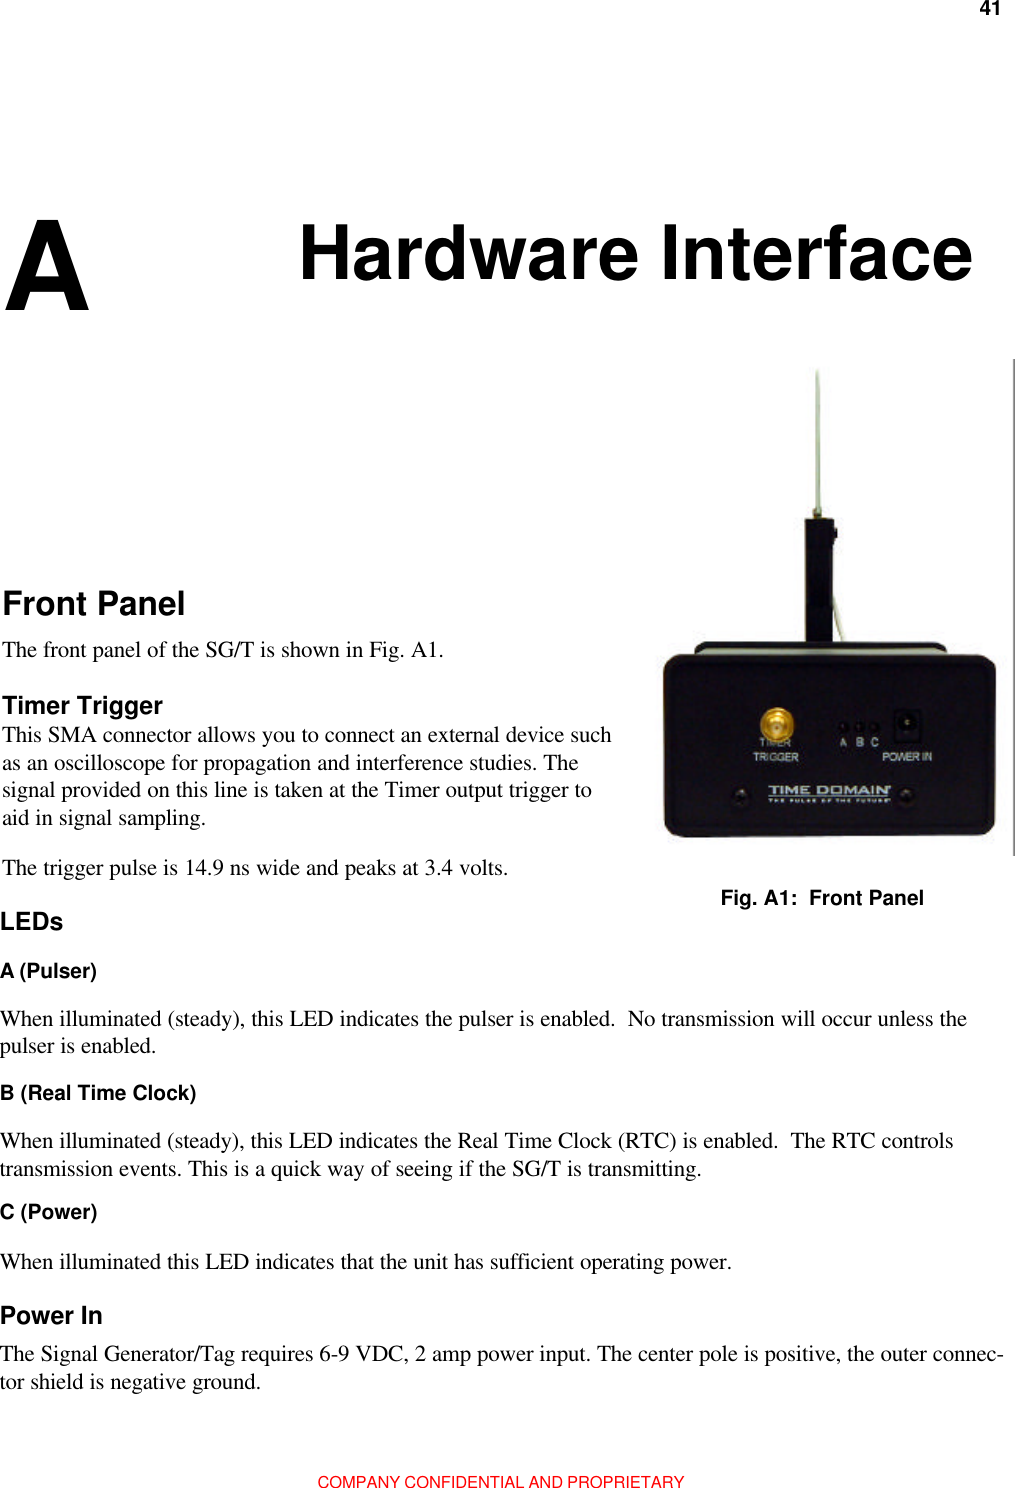 41Appendix A: Hardware InterfaceCOMPANY CONFIDENTIAL AND PROPRIETARYHardware InterfaceFront PanelThe front panel of the SG/T is shown in Fig. A1.Timer TriggerThis SMA connector allows you to connect an external device suchas an oscilloscope for propagation and interference studies. Thesignal provided on this line is taken at the Timer output trigger toaid in signal sampling.The trigger pulse is 14.9 ns wide and peaks at 3.4 volts.Fig. A1:  Front PanelC (Power)When illuminated this LED indicates that the unit has sufficient operating power.A Power InThe Signal Generator/Tag requires 6-9 VDC, 2 amp power input. The center pole is positive, the outer connec-tor shield is negative ground.B (Real Time Clock)When illuminated (steady), this LED indicates the Real Time Clock (RTC) is enabled.  The RTC controlstransmission events. This is a quick way of seeing if the SG/T is transmitting.LEDsA (Pulser)When illuminated (steady), this LED indicates the pulser is enabled.  No transmission will occur unless thepulser is enabled.